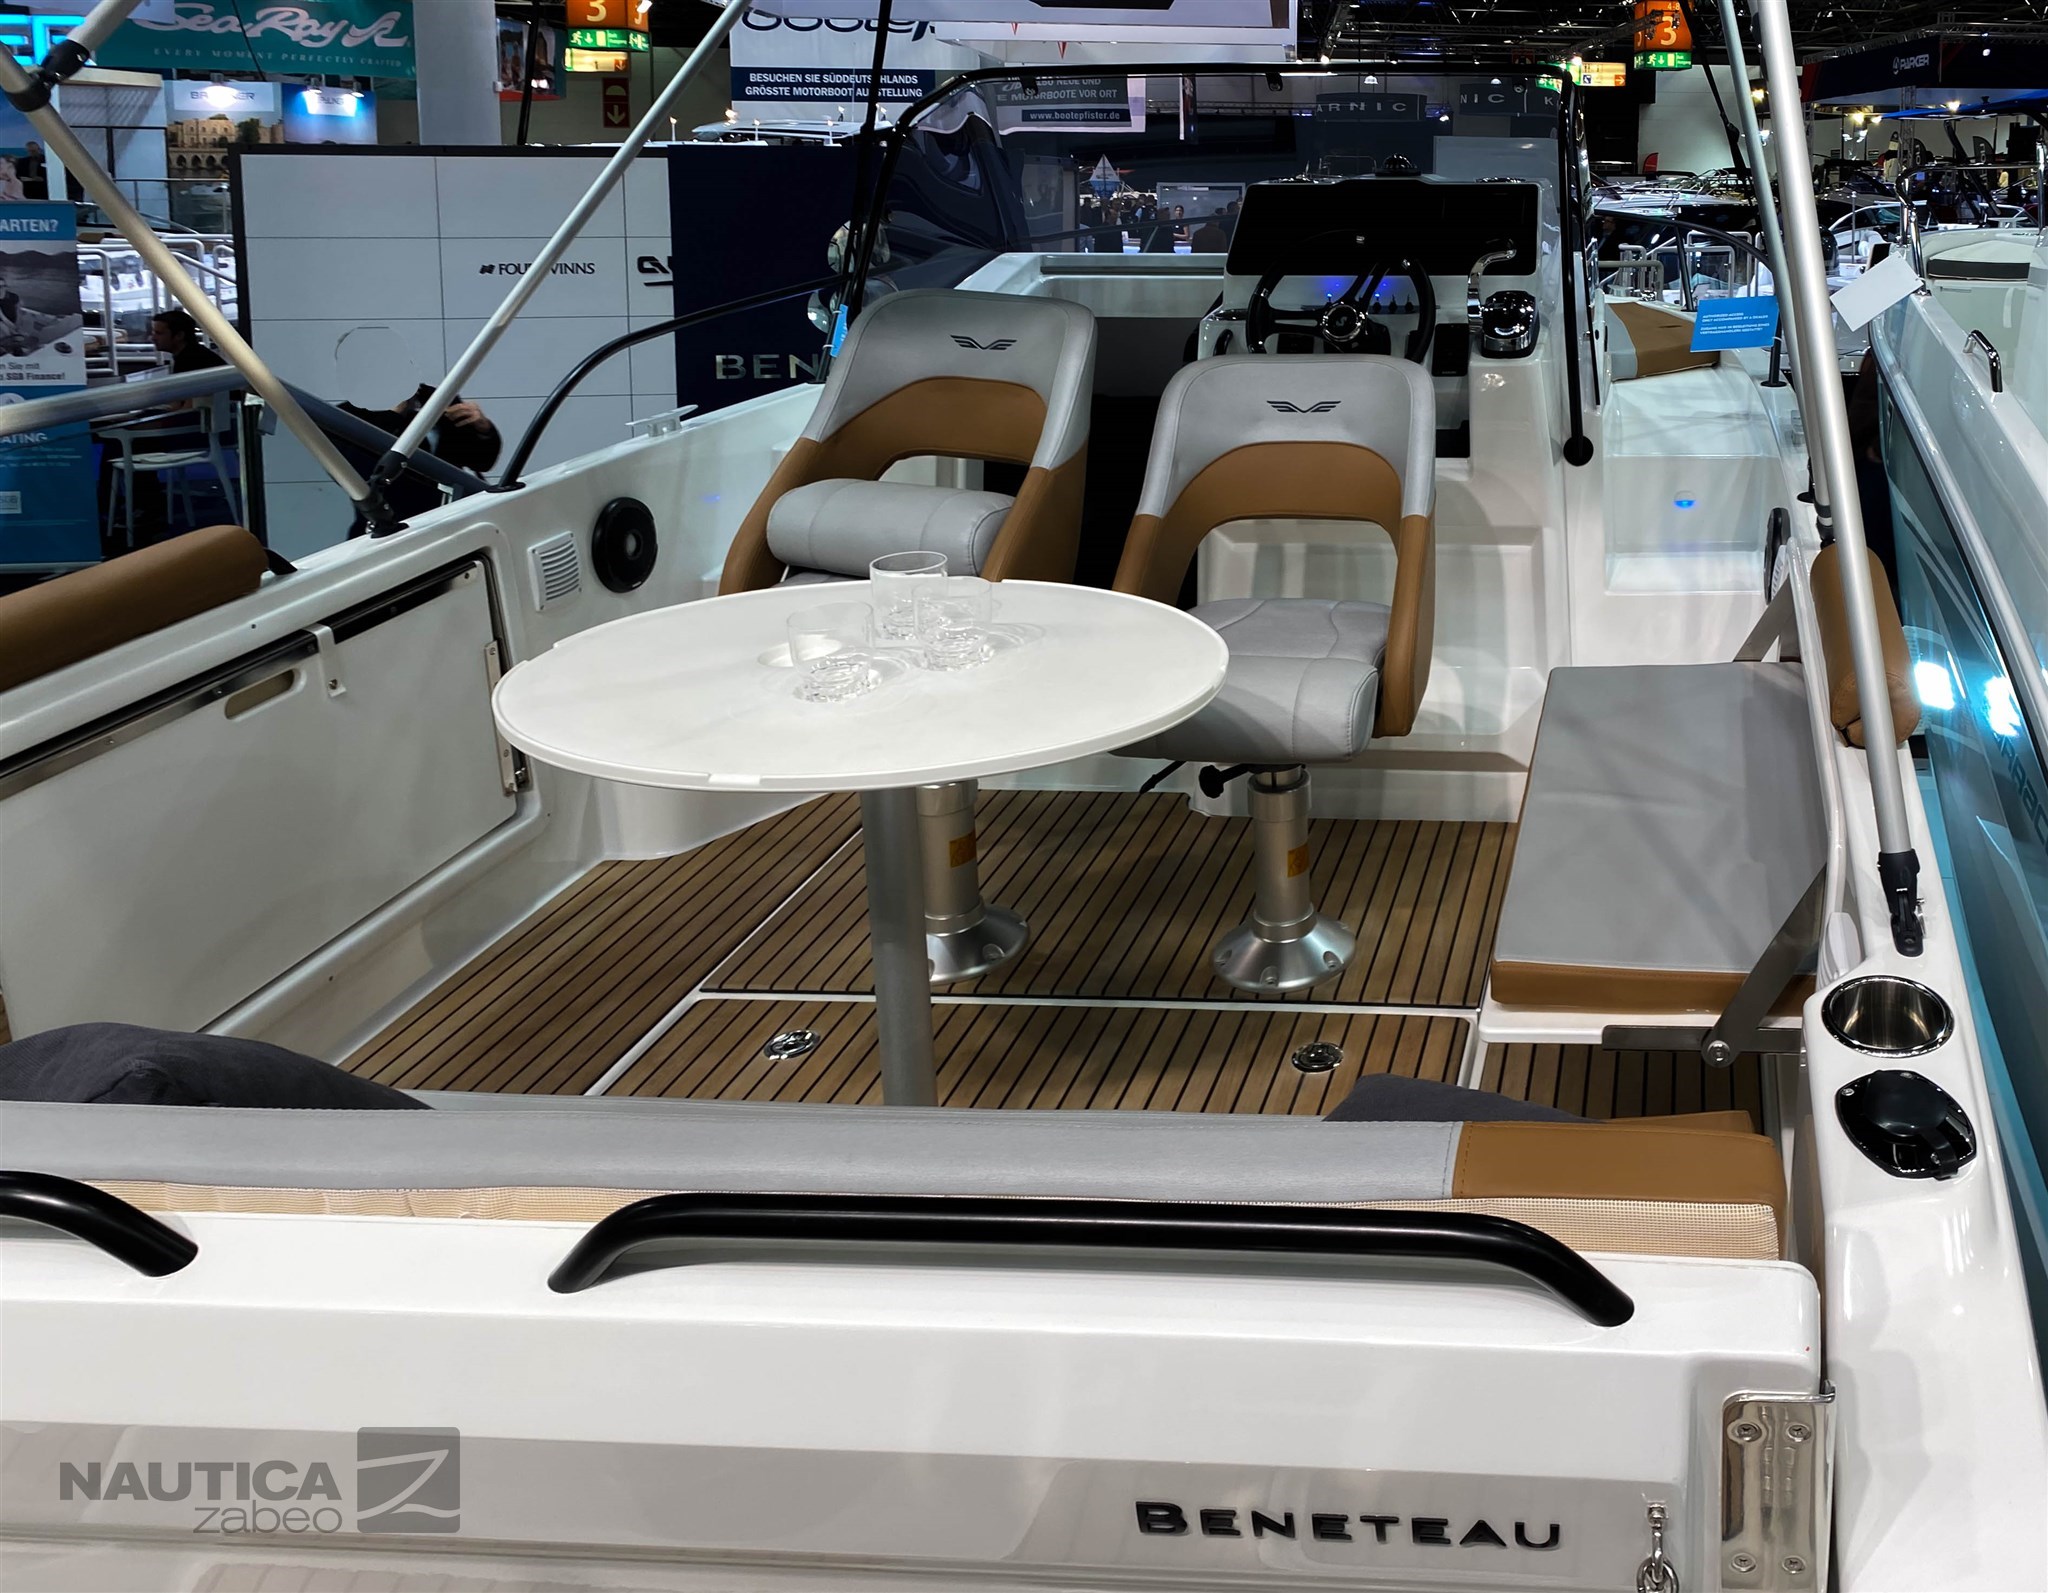 Beneteau Flyer 7 Sundeck New Motorboat For Sale In Italy